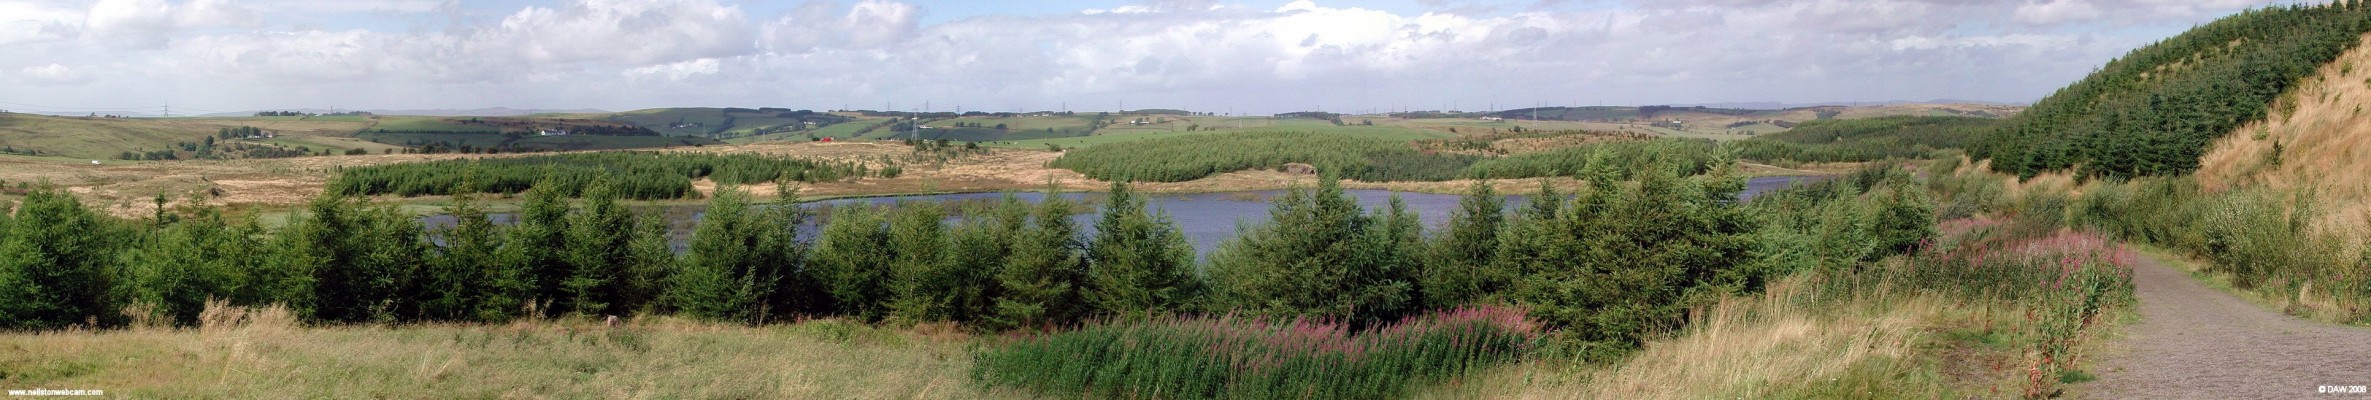 East Renfrewshire Community Woodland
Better known as the Neilston Pad, this summer view is over looking Craighall Dam.  It was taken in 2005 and shows how the conifers are slowly but surely changing the landscape.  [url=http://www.streetmap.co.uk/streetmap.dll?G2M?X=247260&Y=654910&A=Y&Z=120/]Map location.[/url]
